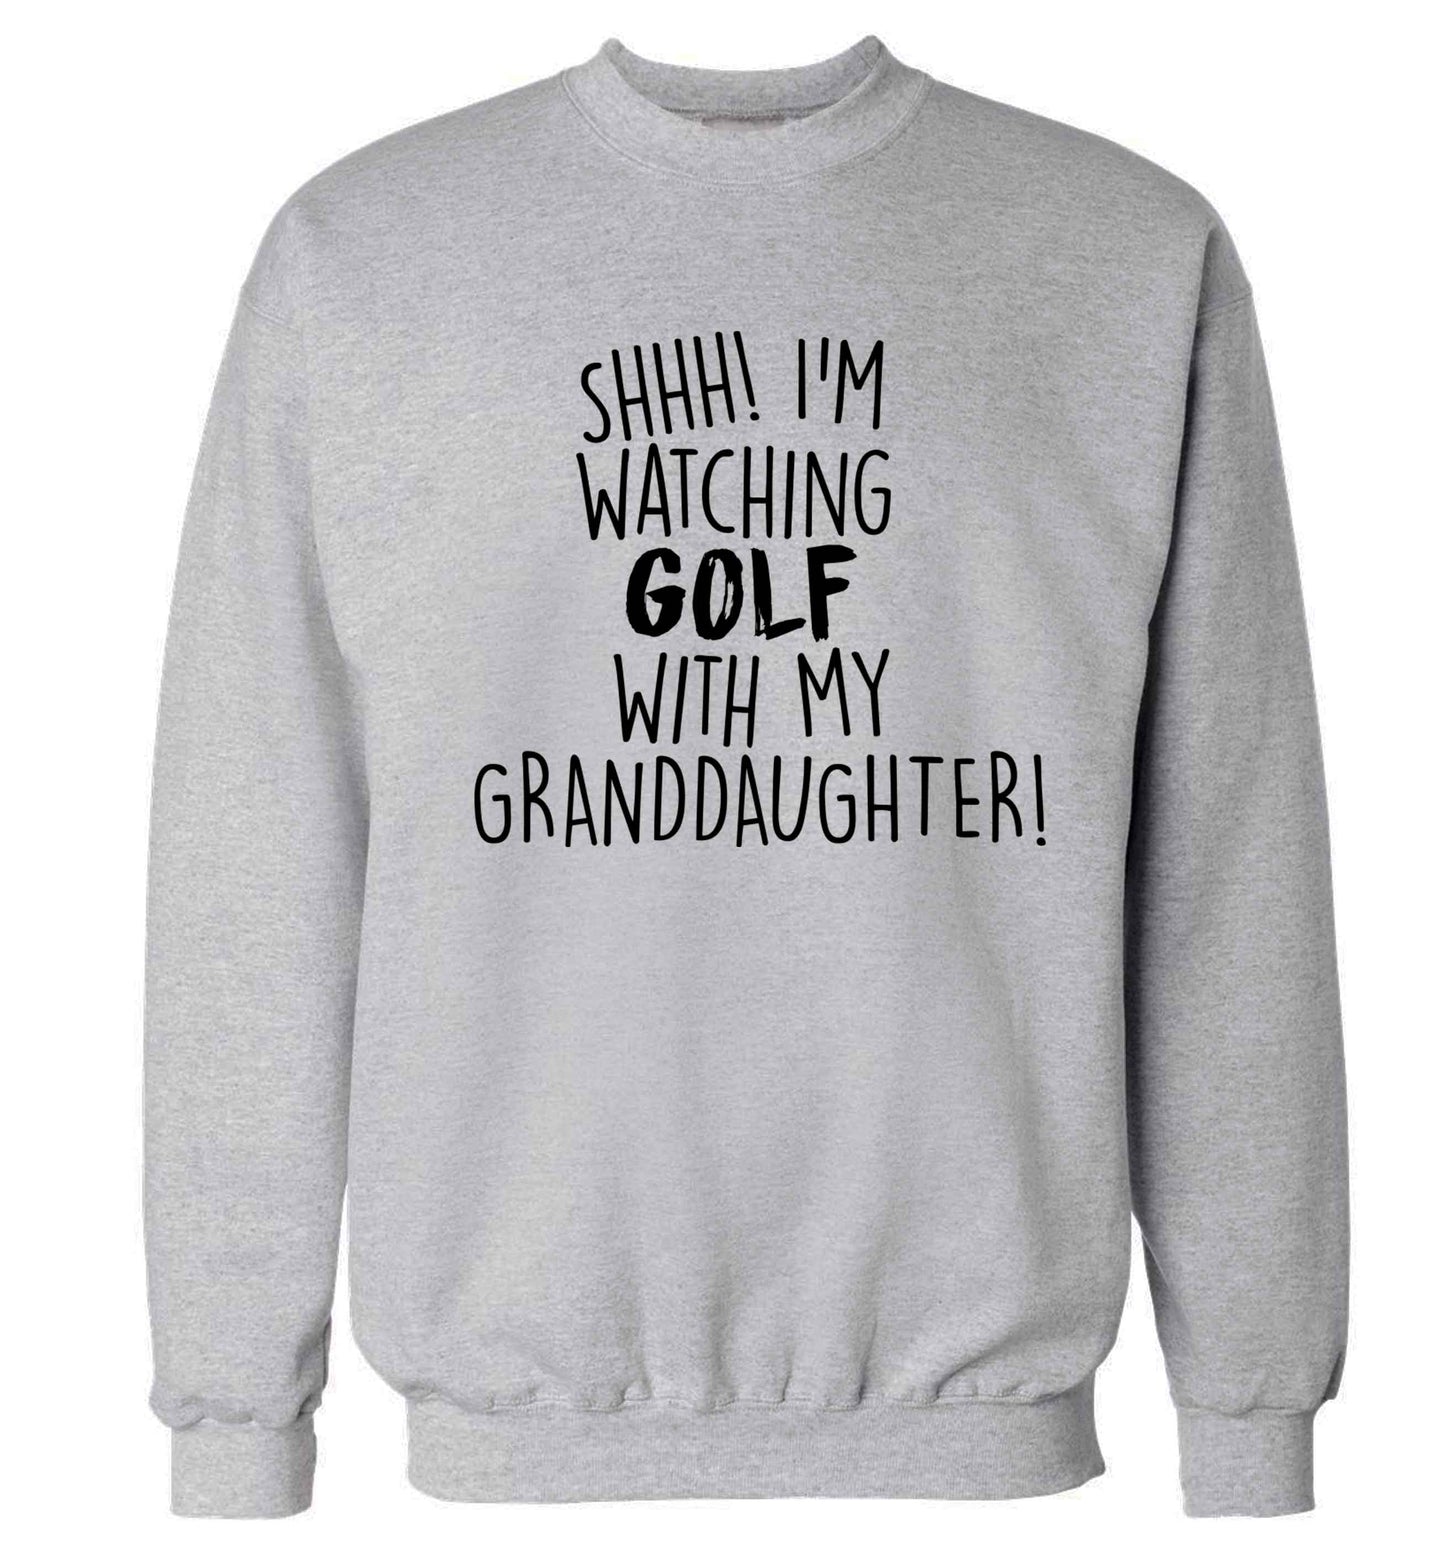 Shh I'm watching golf with my granddaughter Adult's unisex grey Sweater 2XL